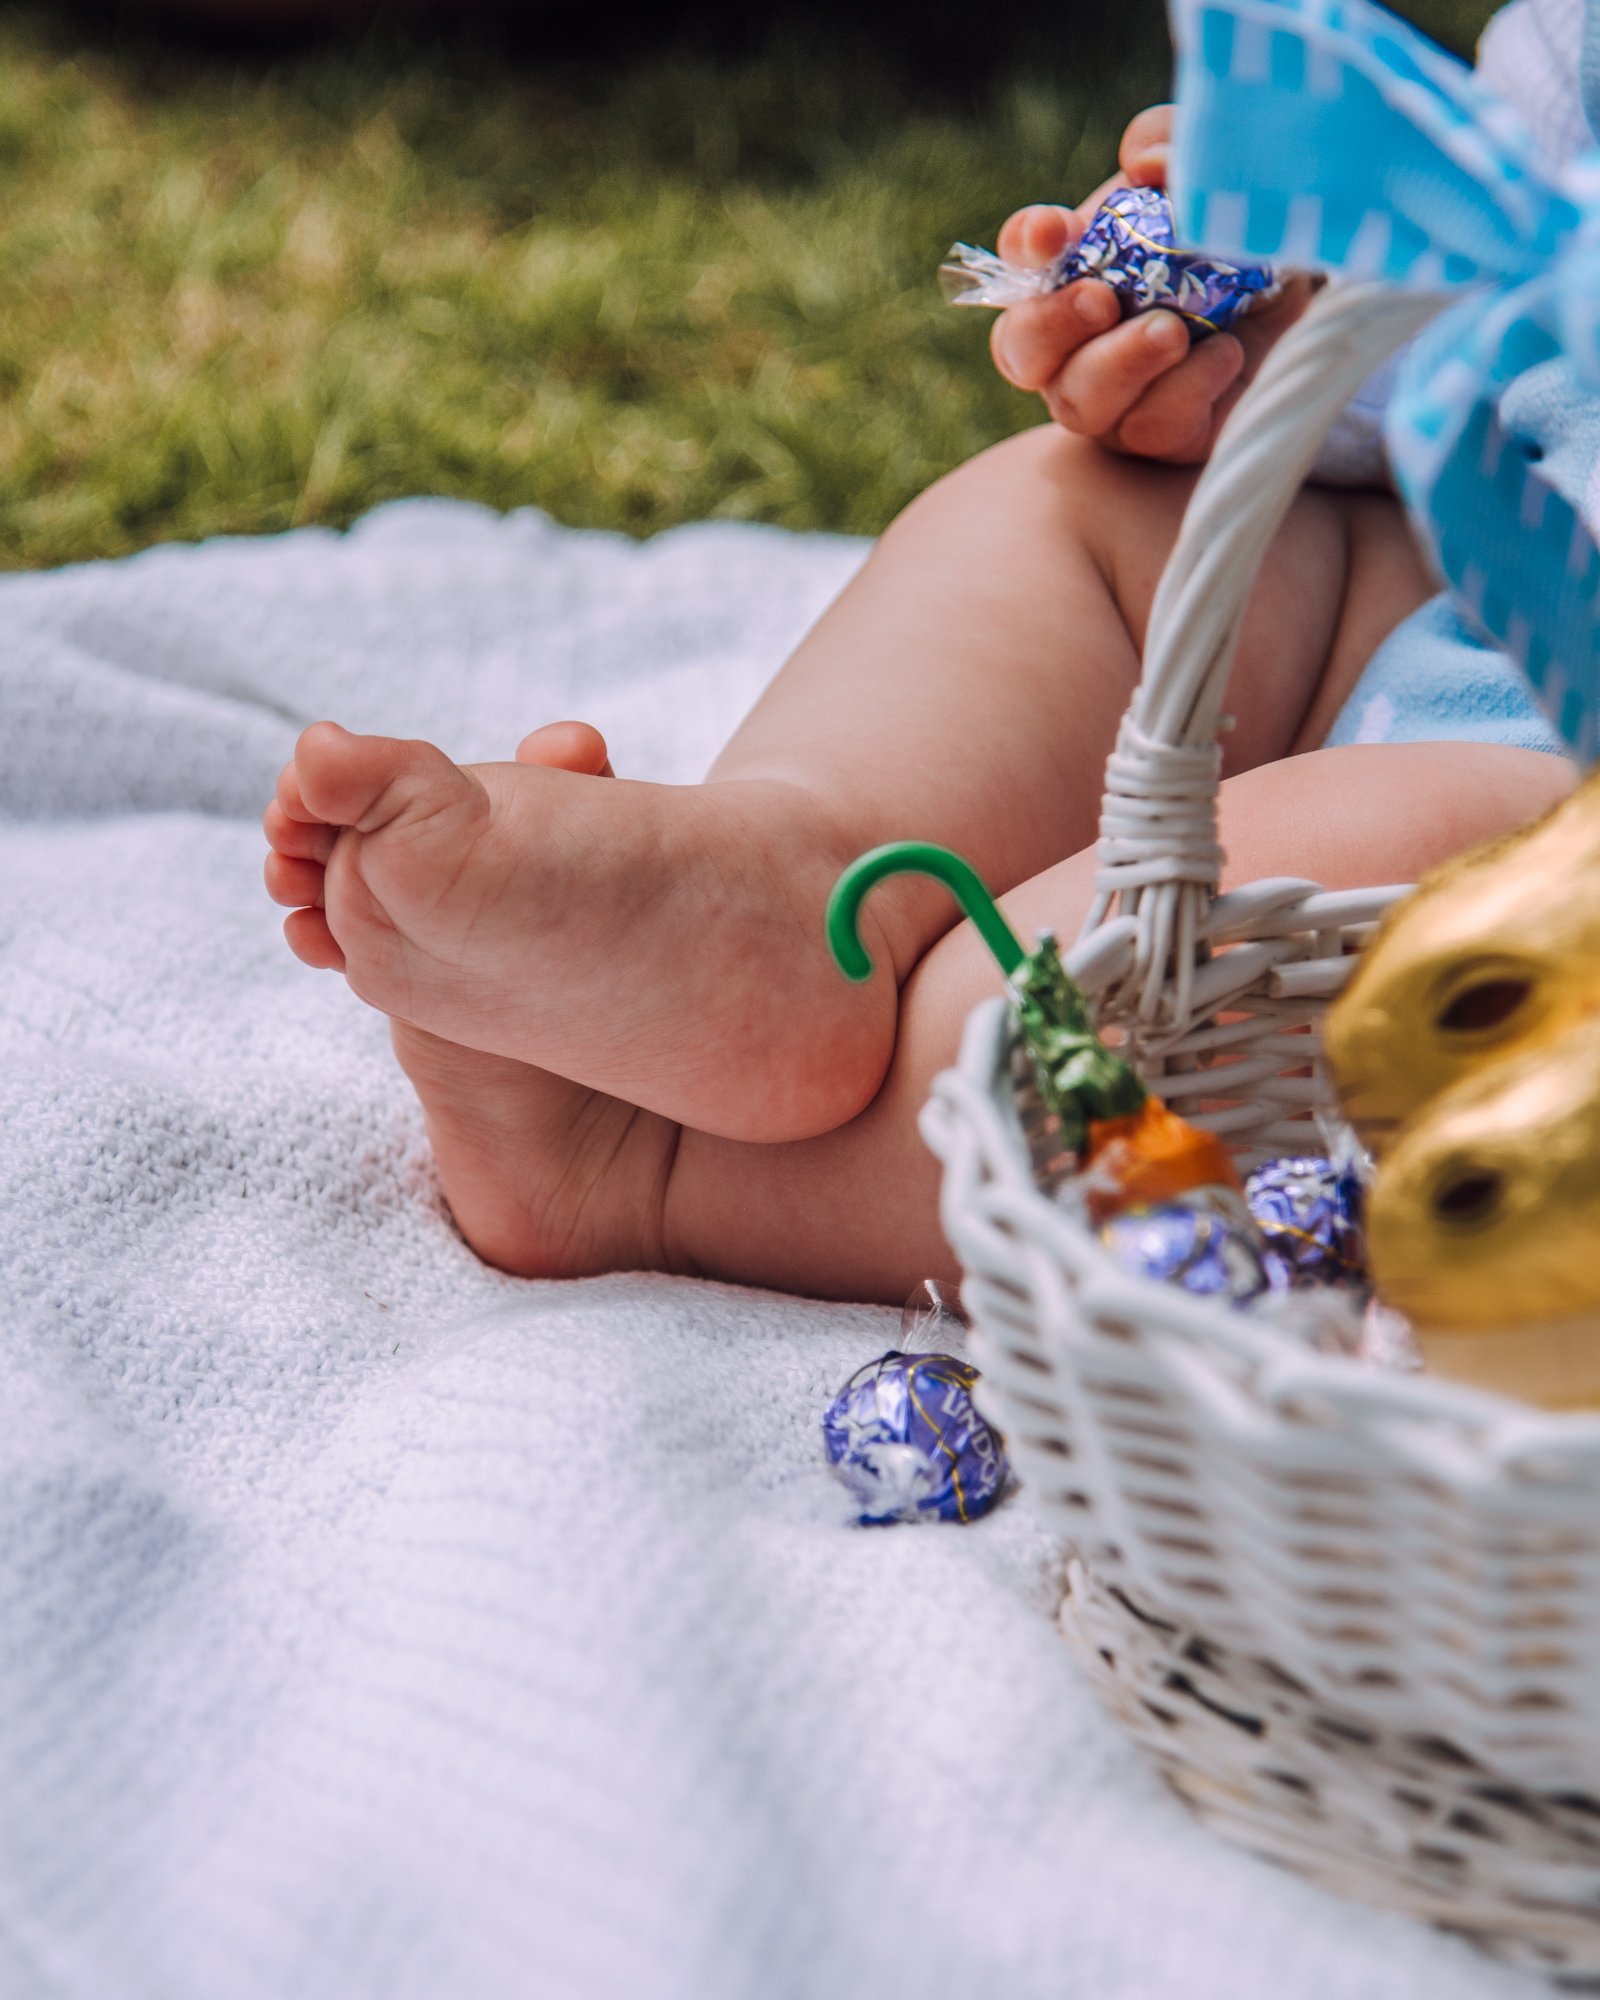 Spring Baby Photoshoot Ideas - Close-Up Easter Basket